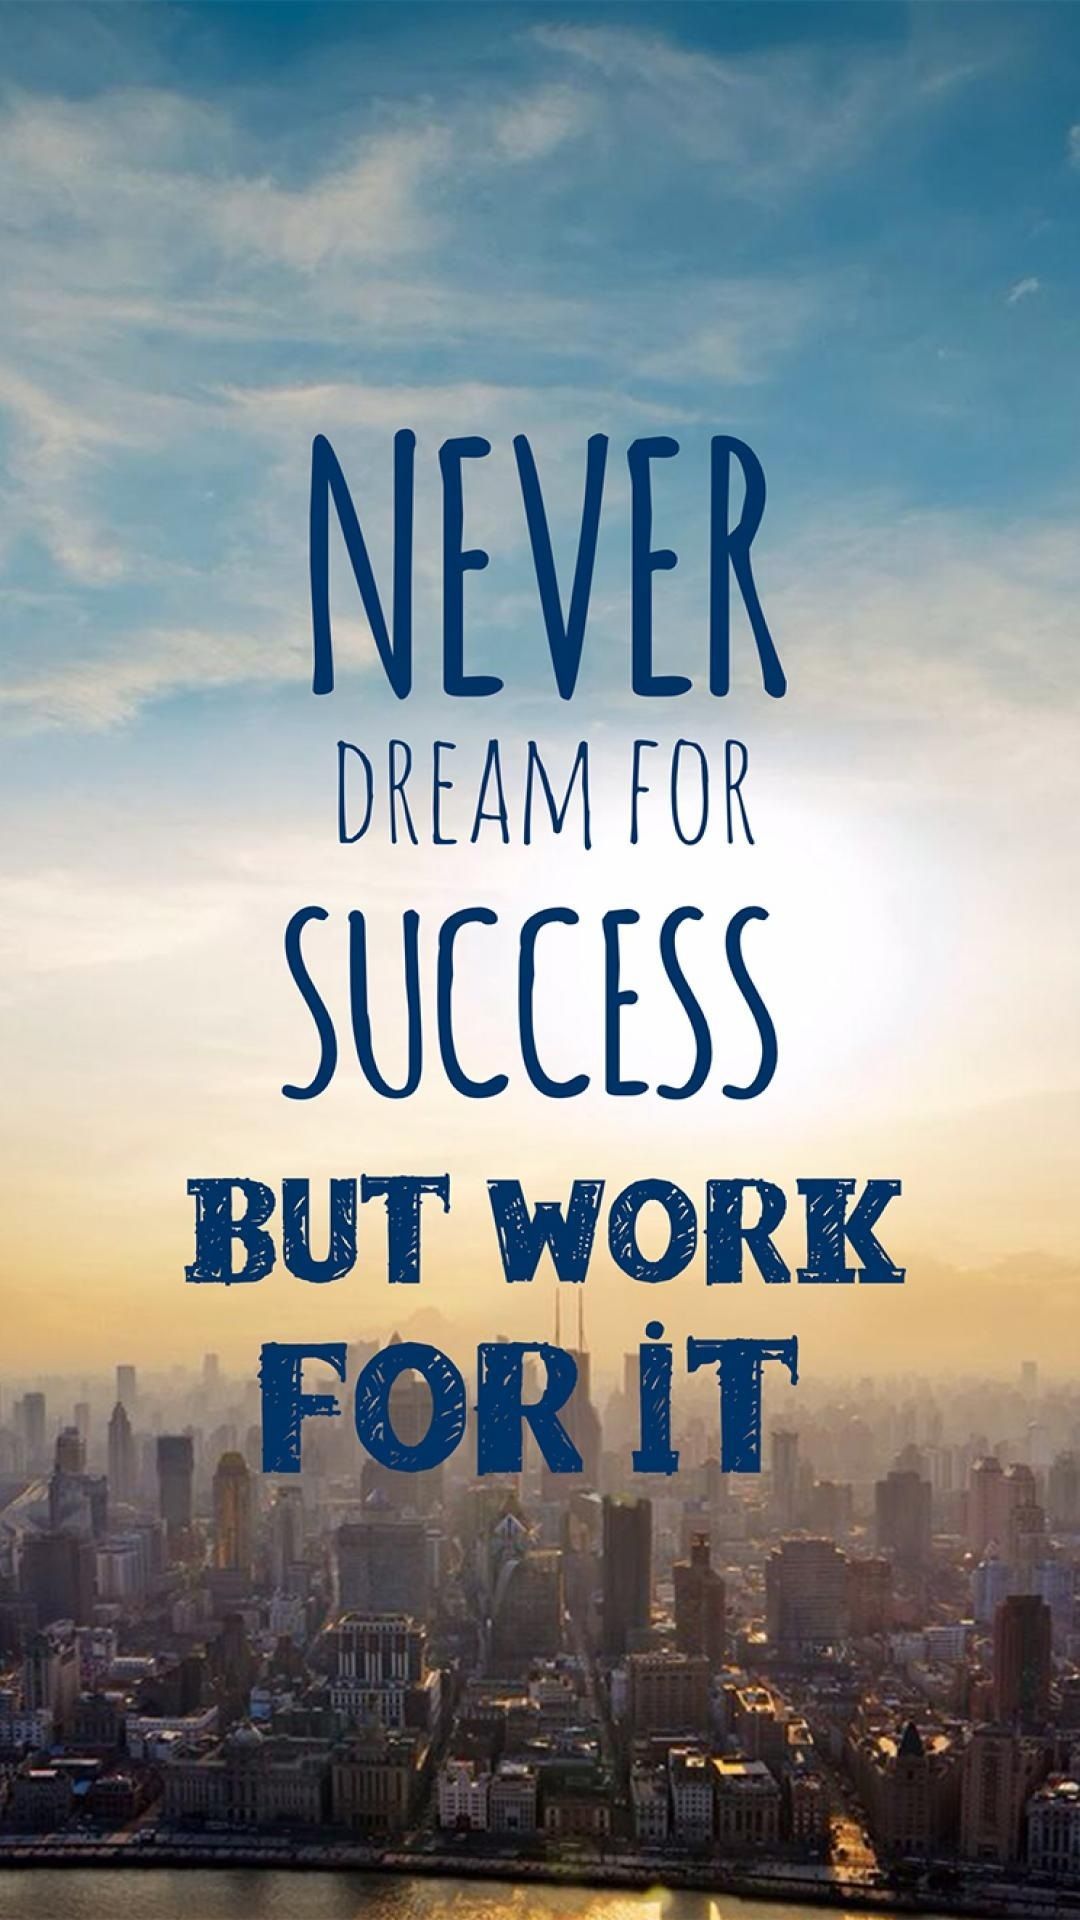 Never dream for success but work for it. Inspirational quotes wallpaper, Motivational quotes wallpaper, Good life quotes